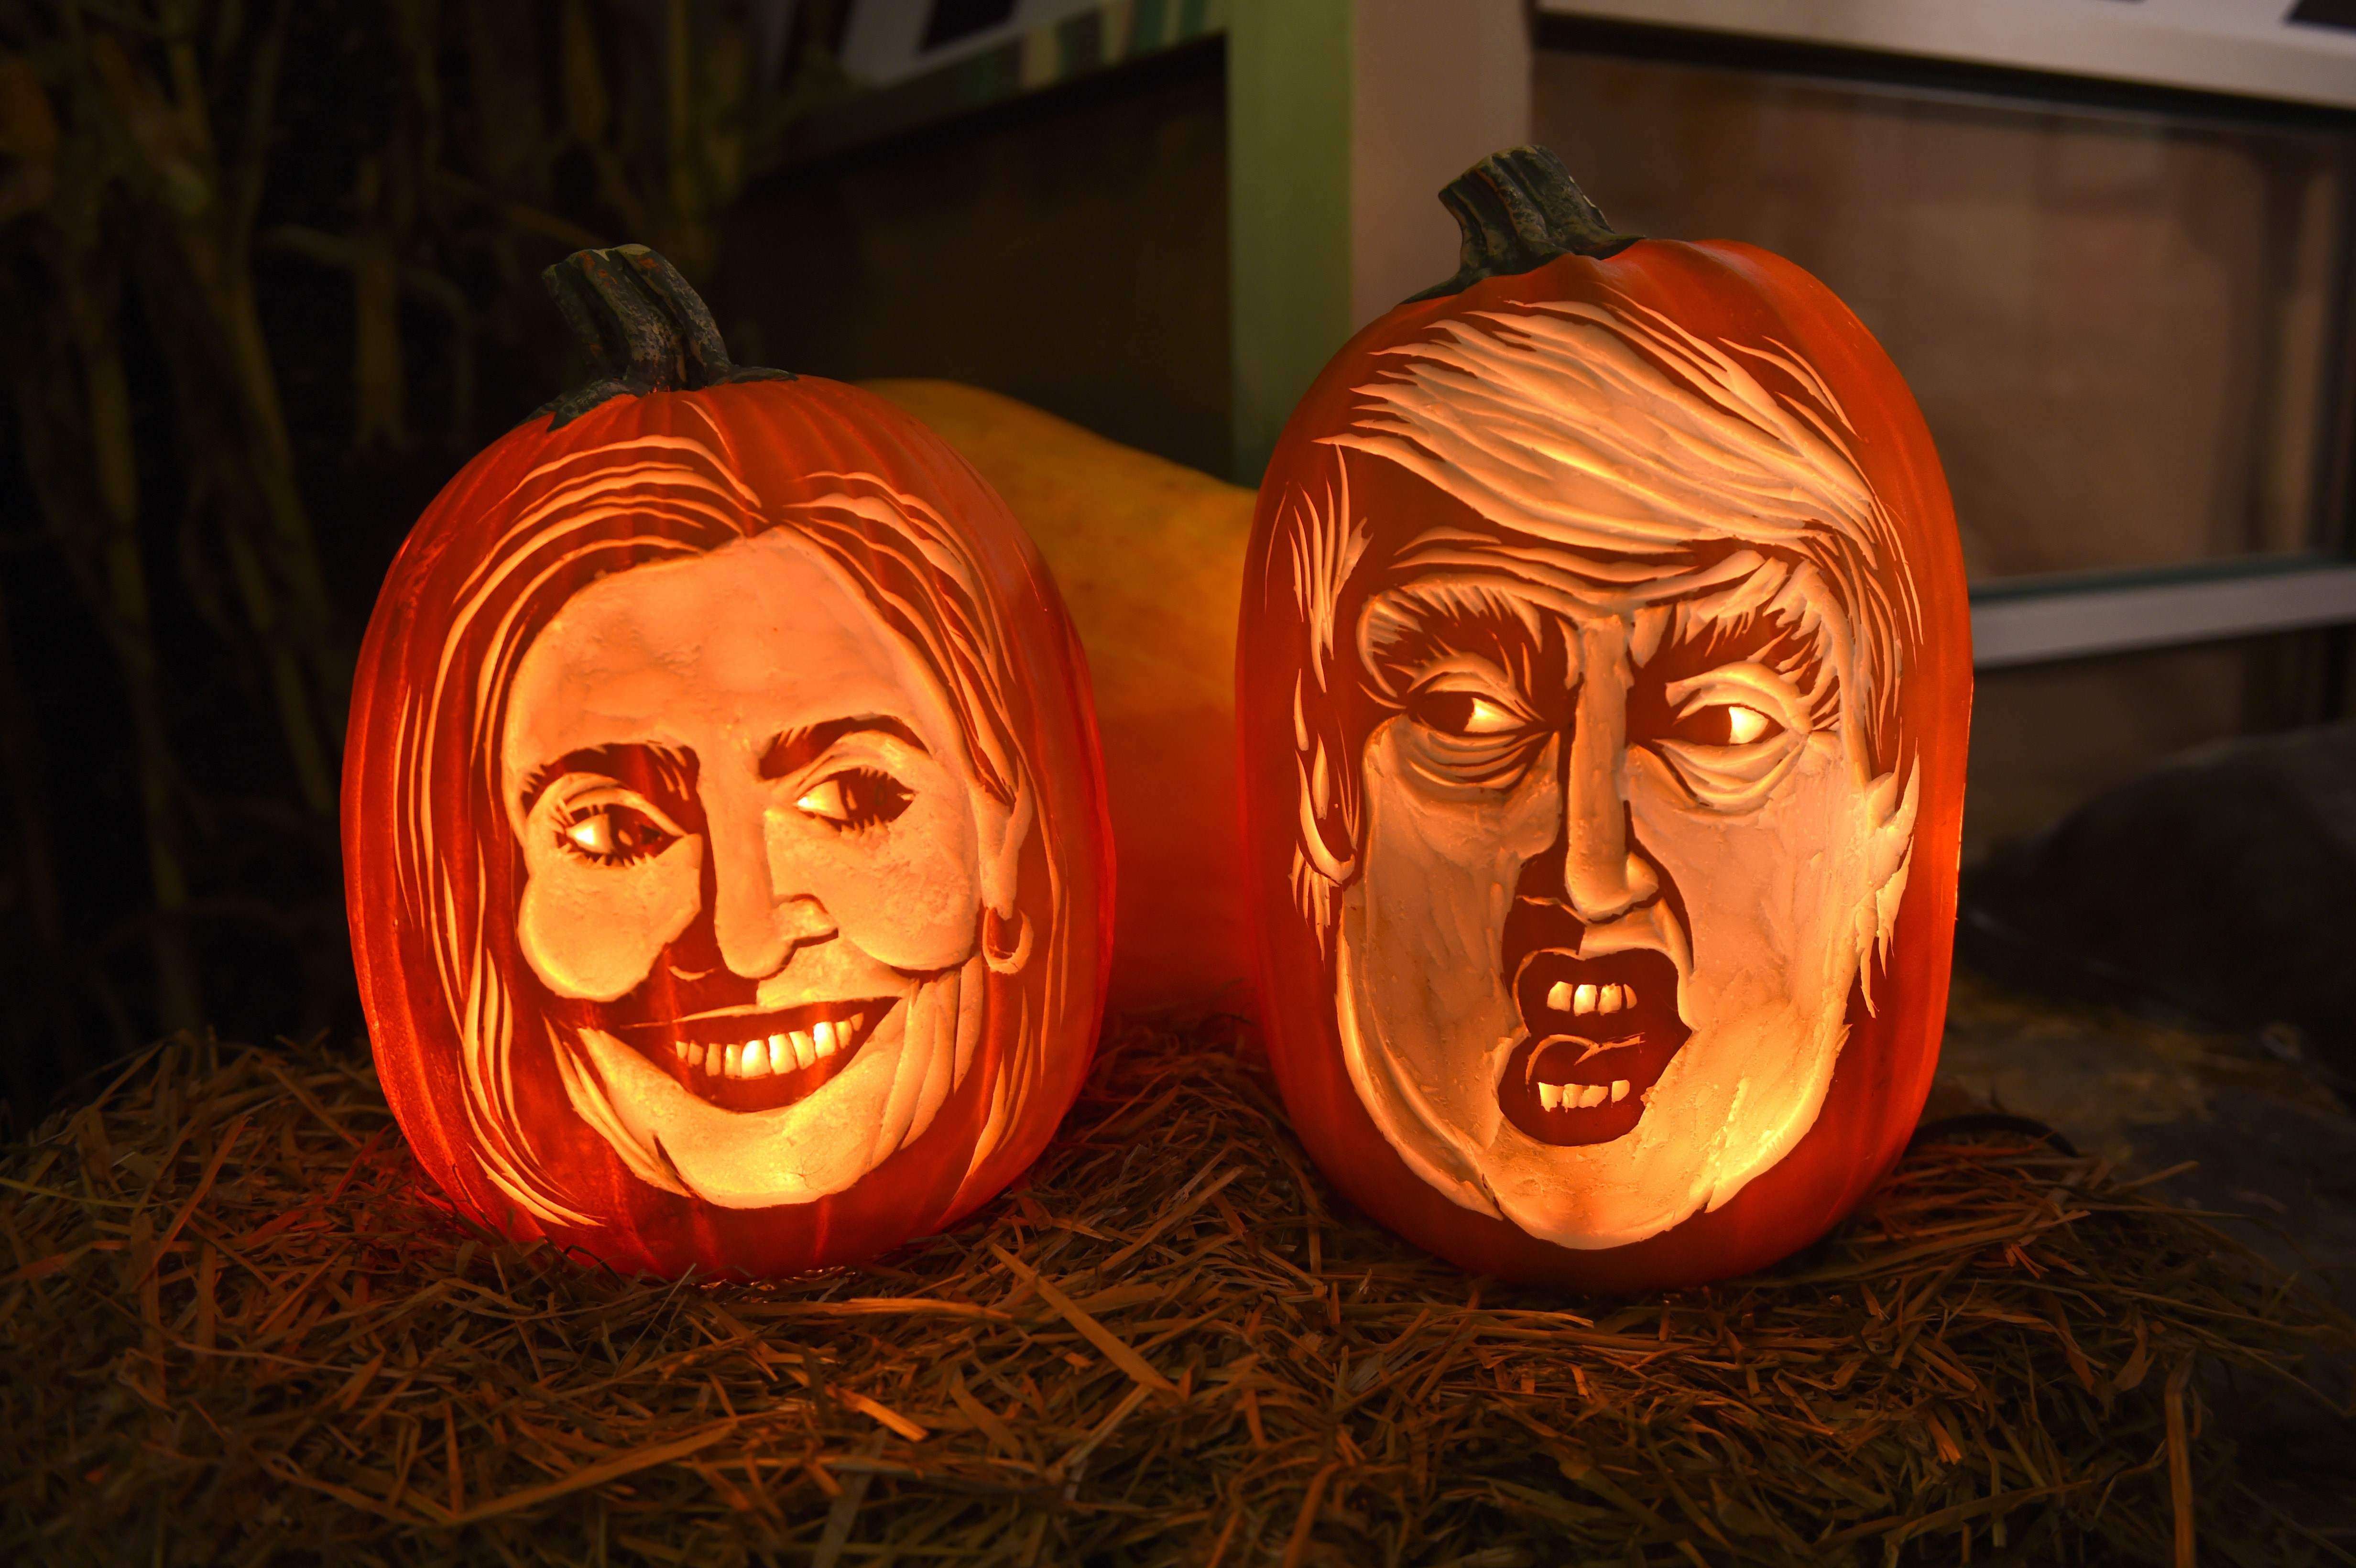 (FILES) This file photo taken on October 28, 2016 shows styrofoam carvings on display of Democratic presidential nominee Hillary Clinton and her Republican counterpart Donald Trump at the Chelsea Market in New York. The specter of terrorism, rigged elections, social or decommissioning of nuclear war ... The presidential campaign vitriolic put Americans on edge. "People are always more stressed at election time, but I've never seen that at this level," says Judi Bloom, a psychologist in Santa Monica, California, told AFP October 29, 2016. A recent study from the American Psychiatric Association (APA), more than one in two Americans (52%) are stressed by the returning of 8 November. / AFP PHOTO / TIMOTHY A. CLARY